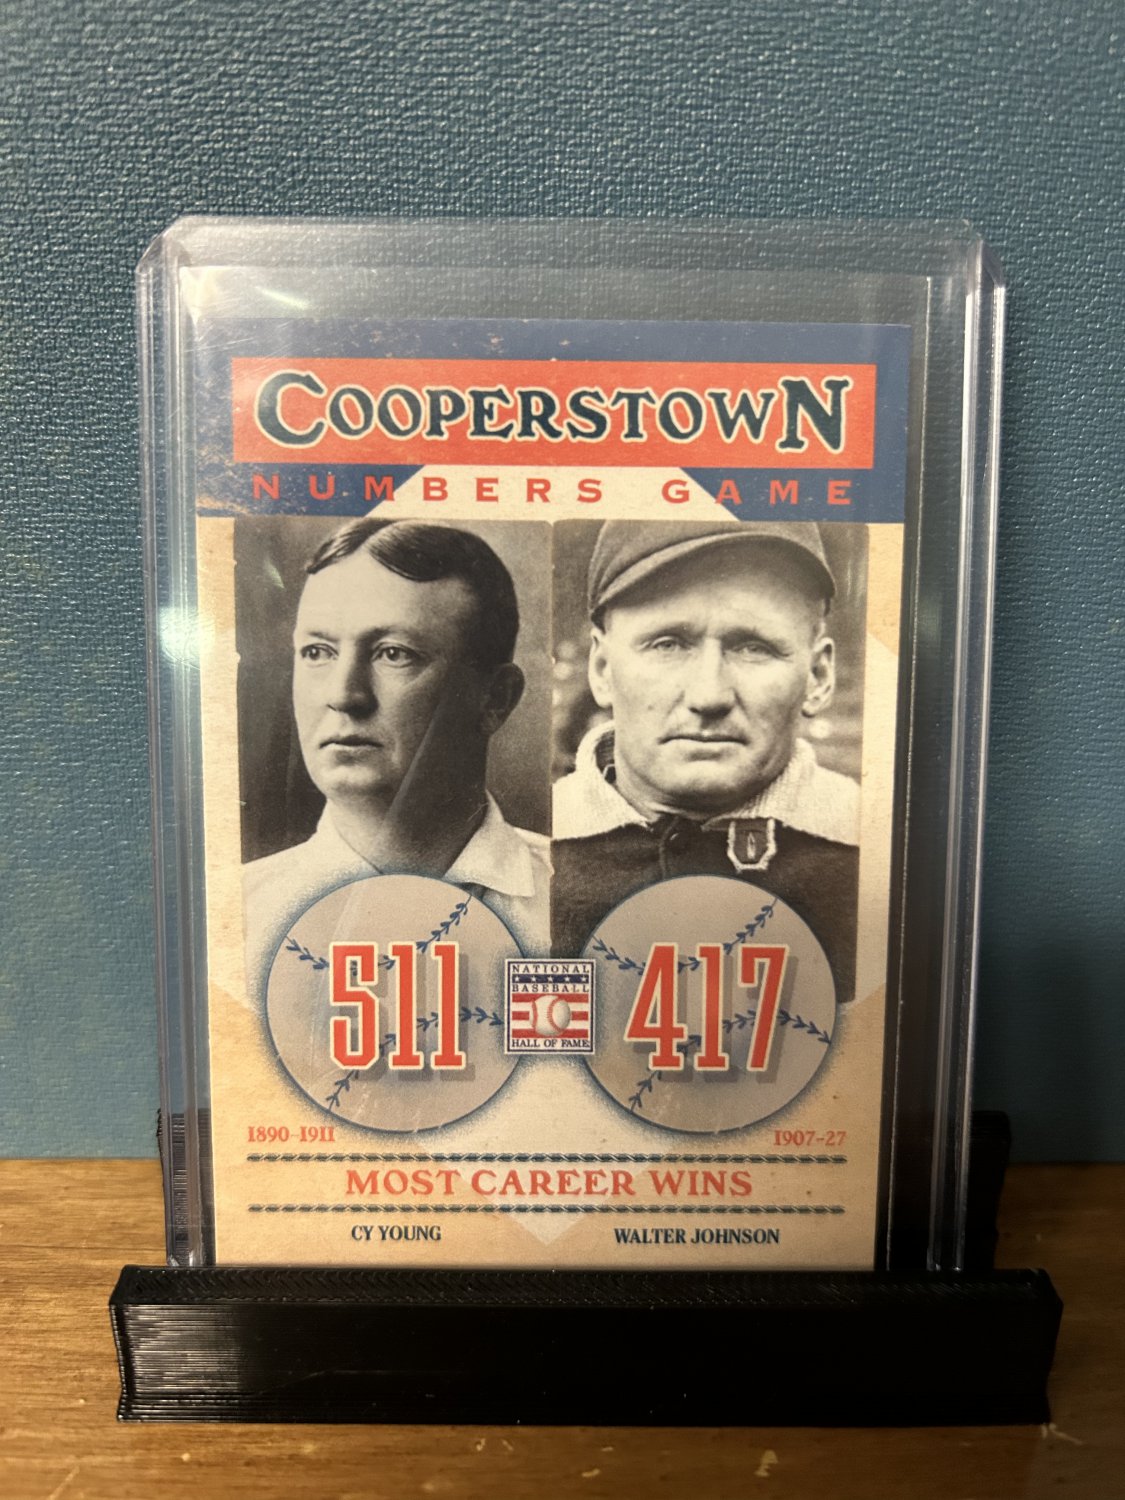 2013 Panini Cooperstown Numbers Game Cy Young/Walter Johnson #2